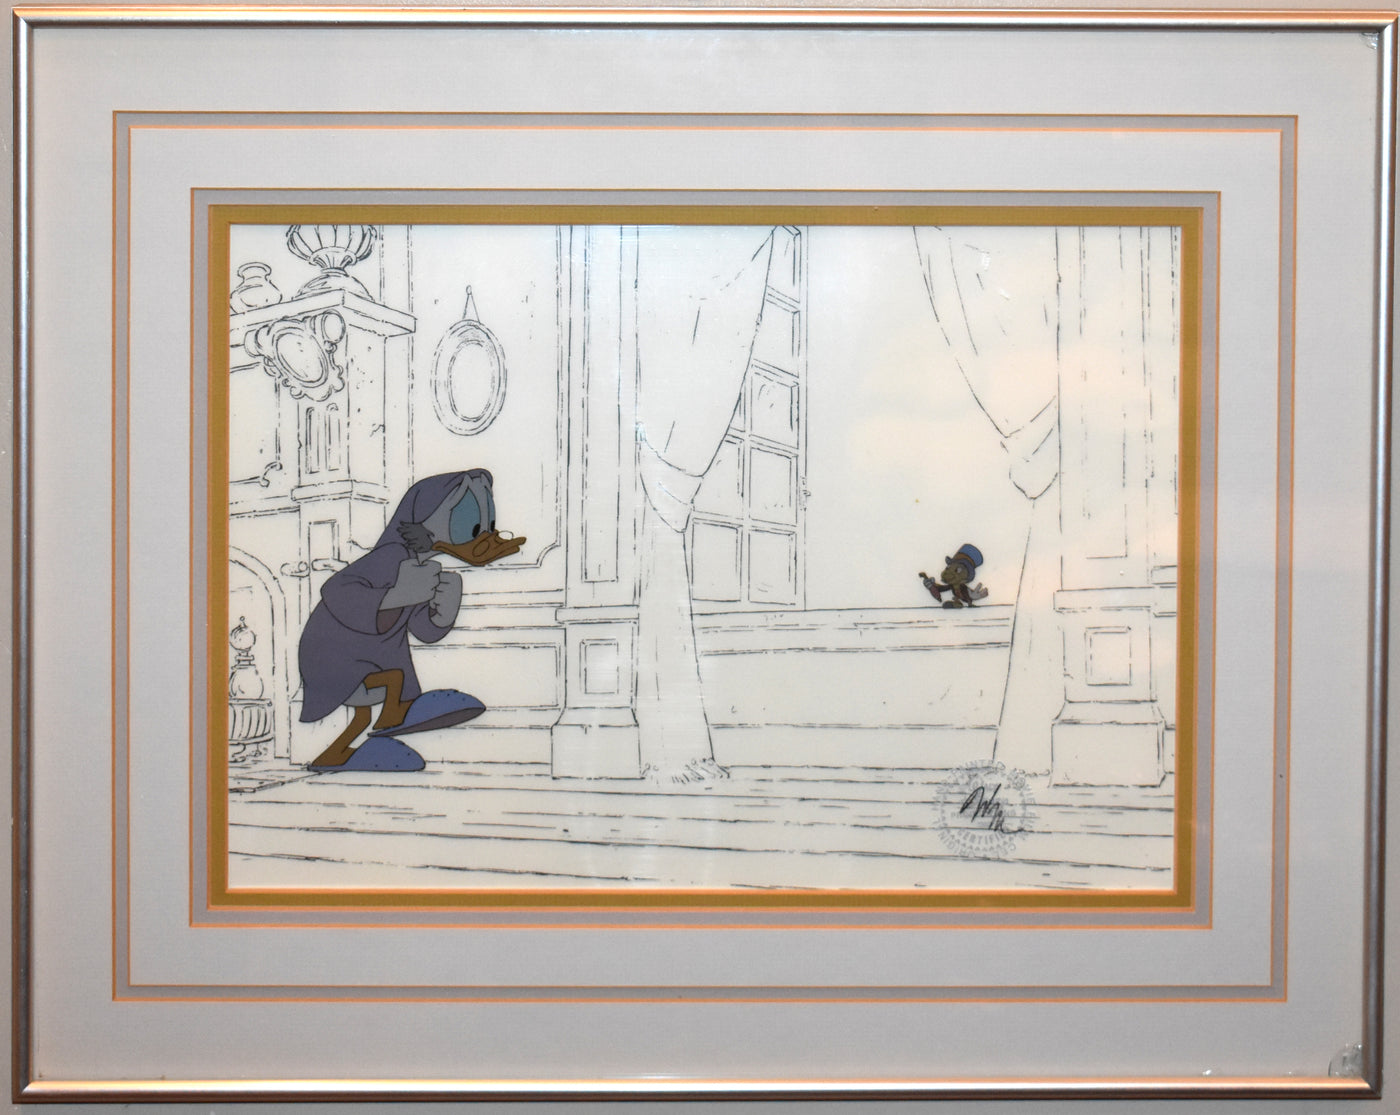 Original Walt Disney Production Cel from Mickey's Christmas Carol featuring Scrooge McDuck and Jiminy Cricket